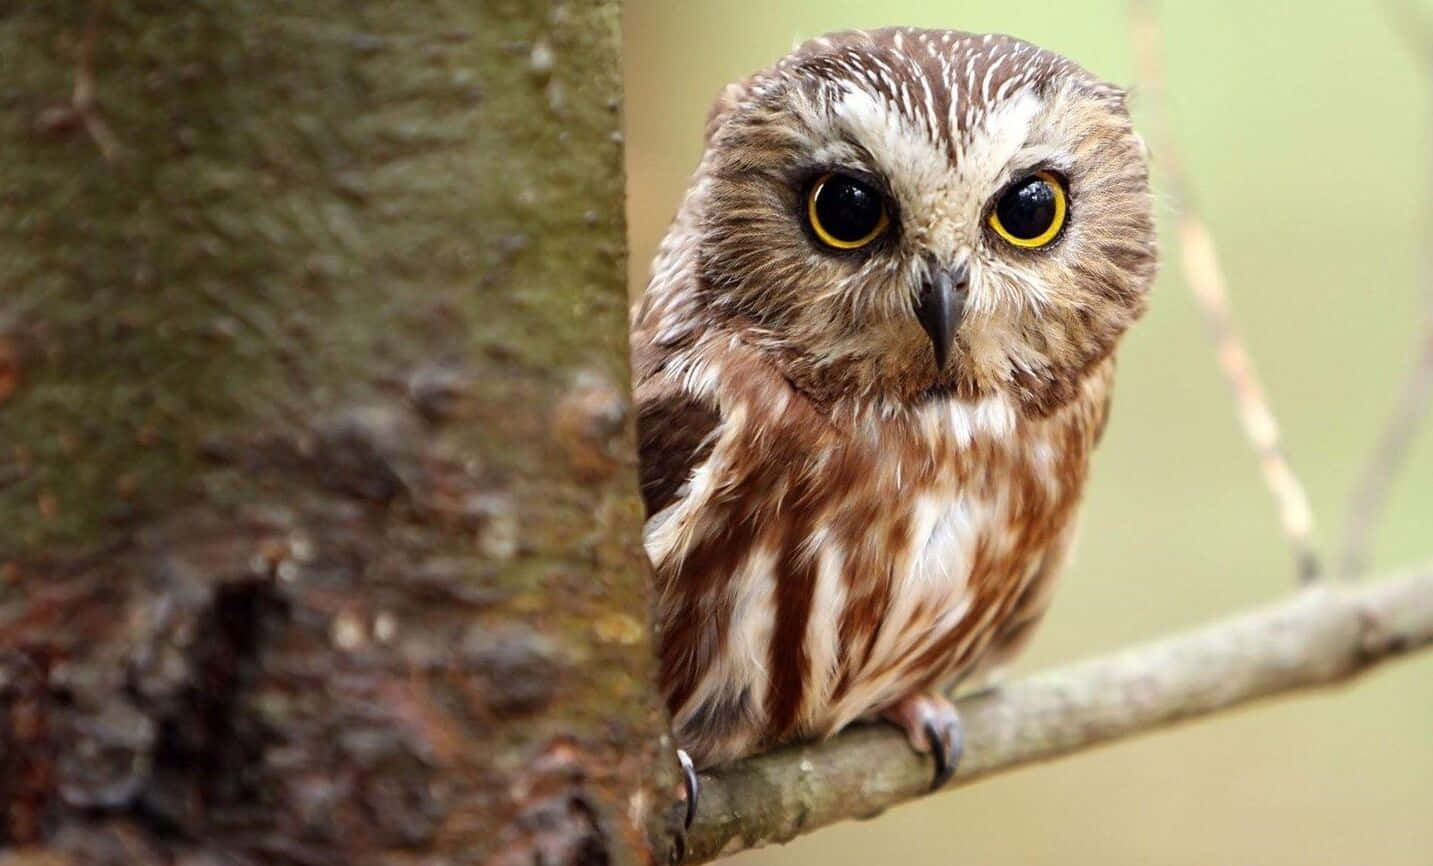 Download An Adorable Cute Owl on a Tree Branch | Wallpapers.com